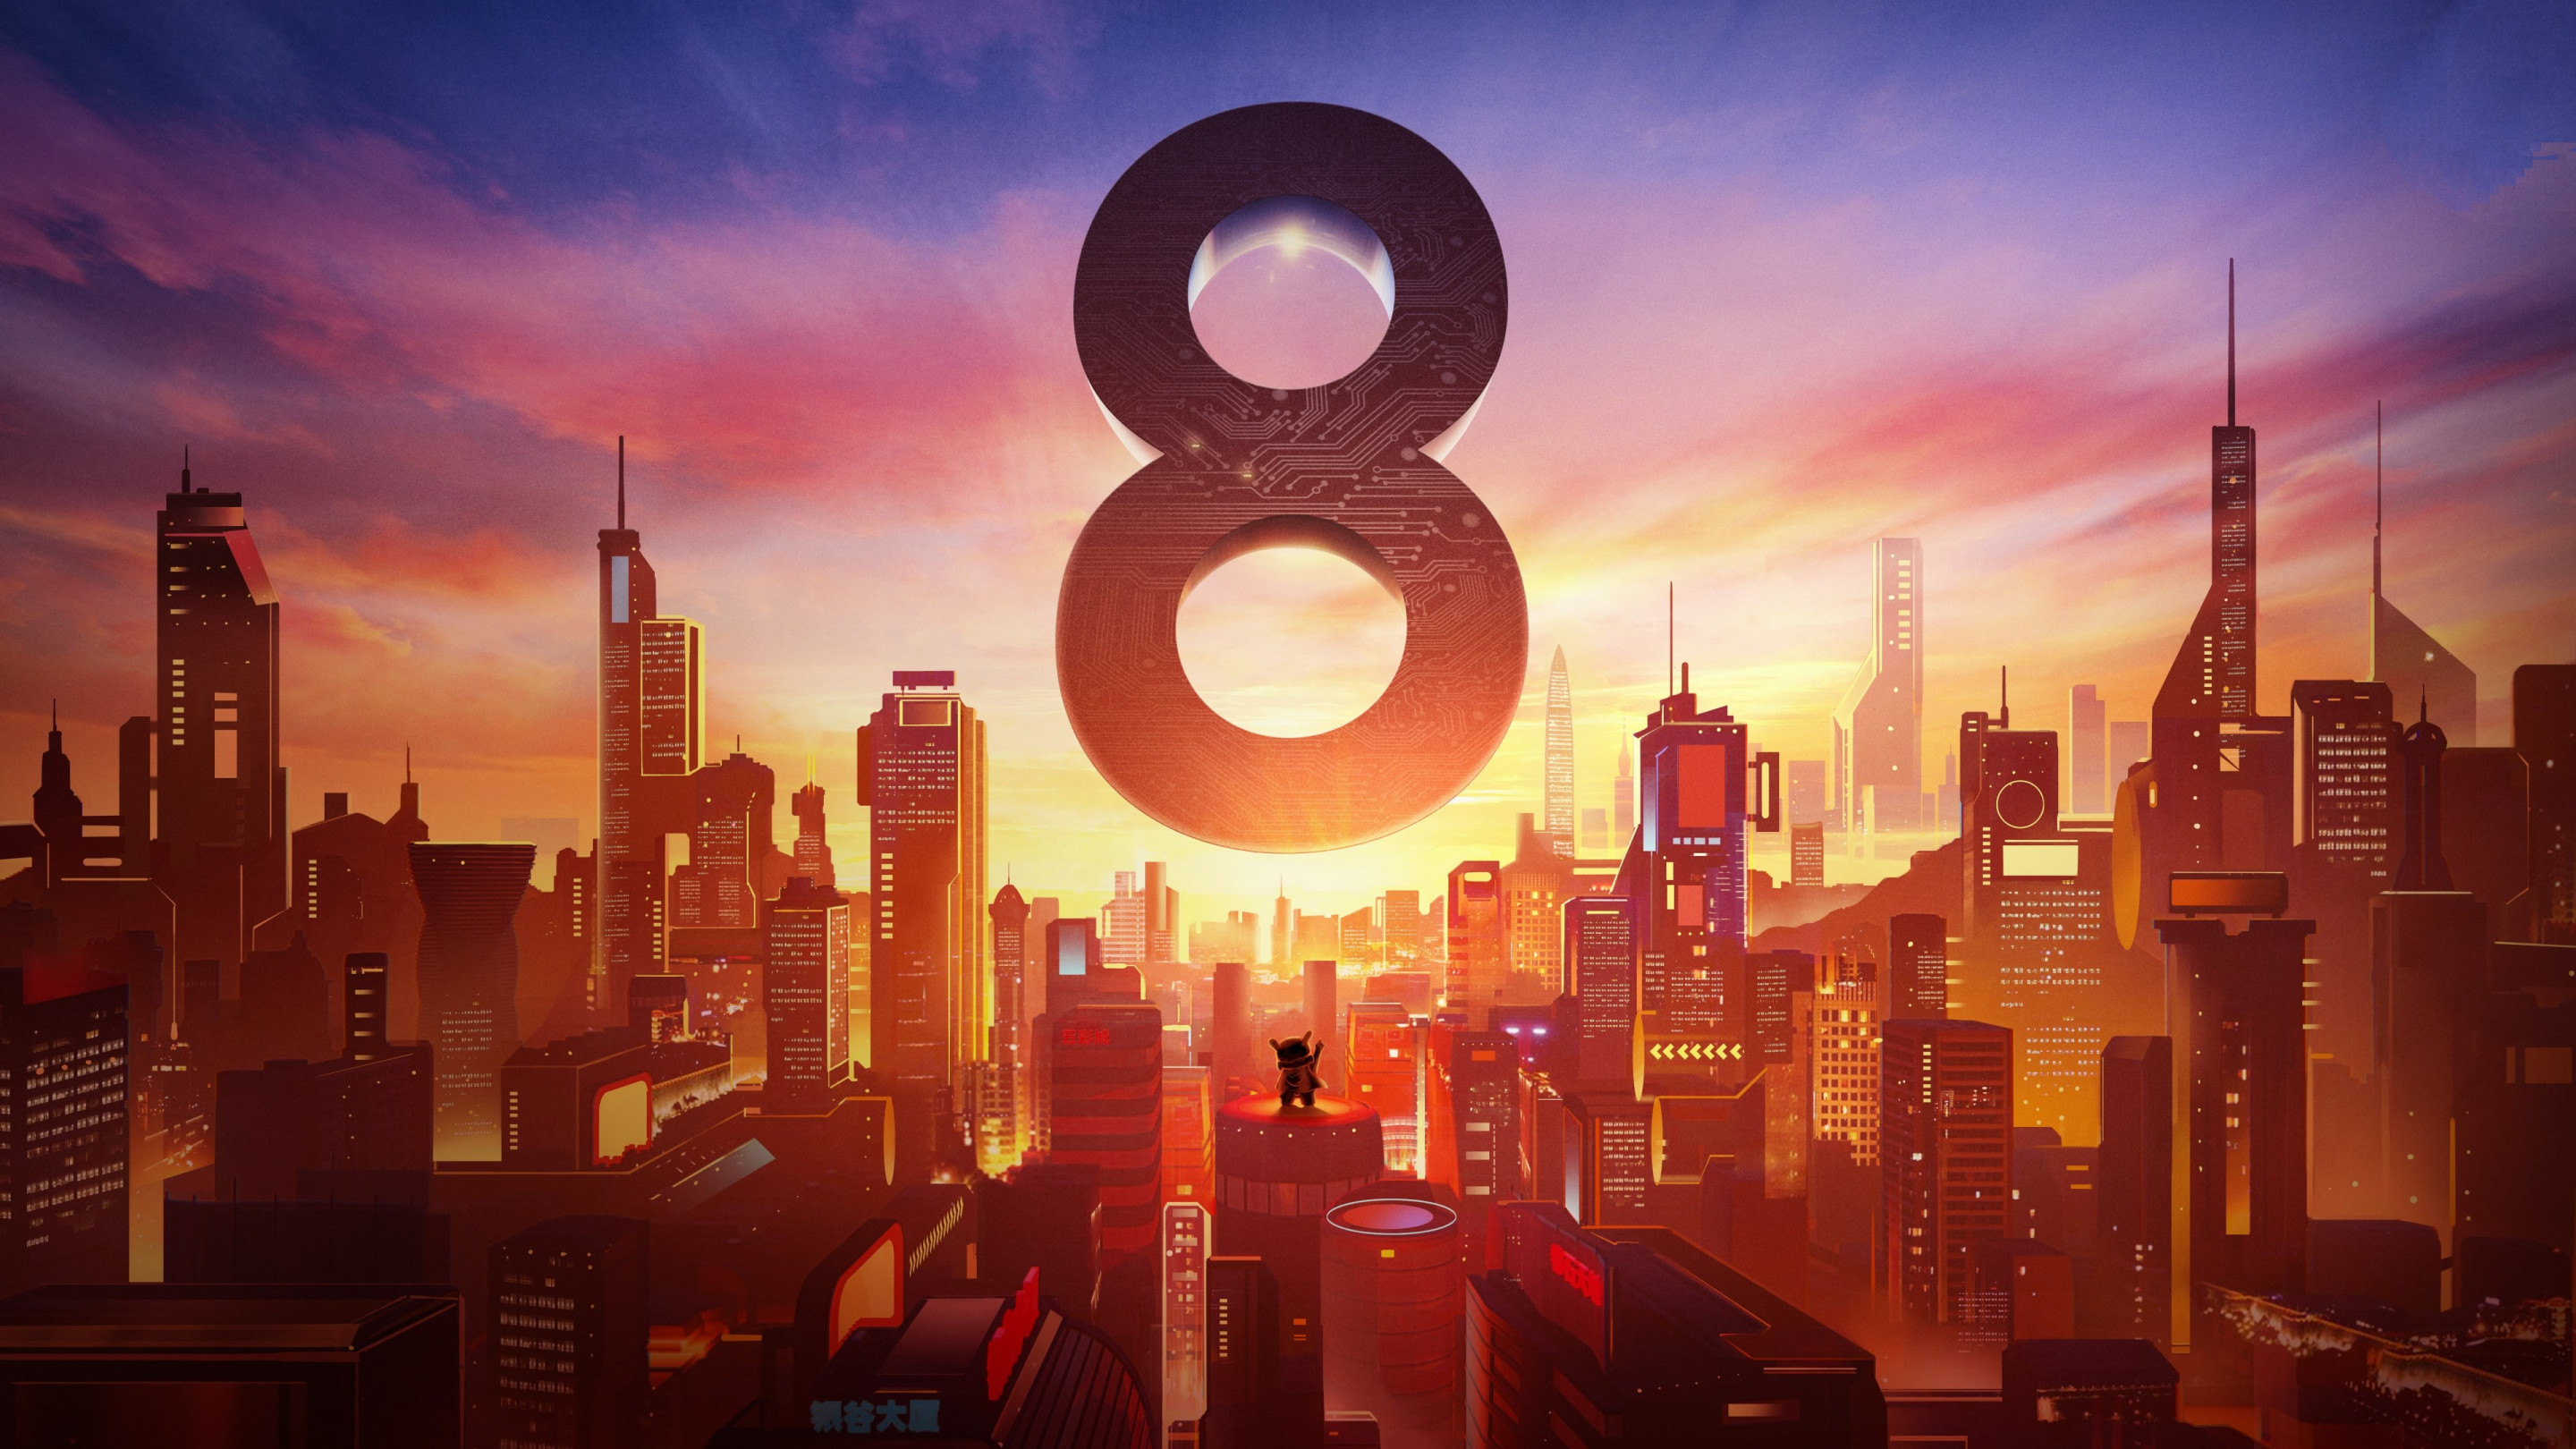 Xiaomi Mi 8. Poster from the launch event wallpaper 2880x1620